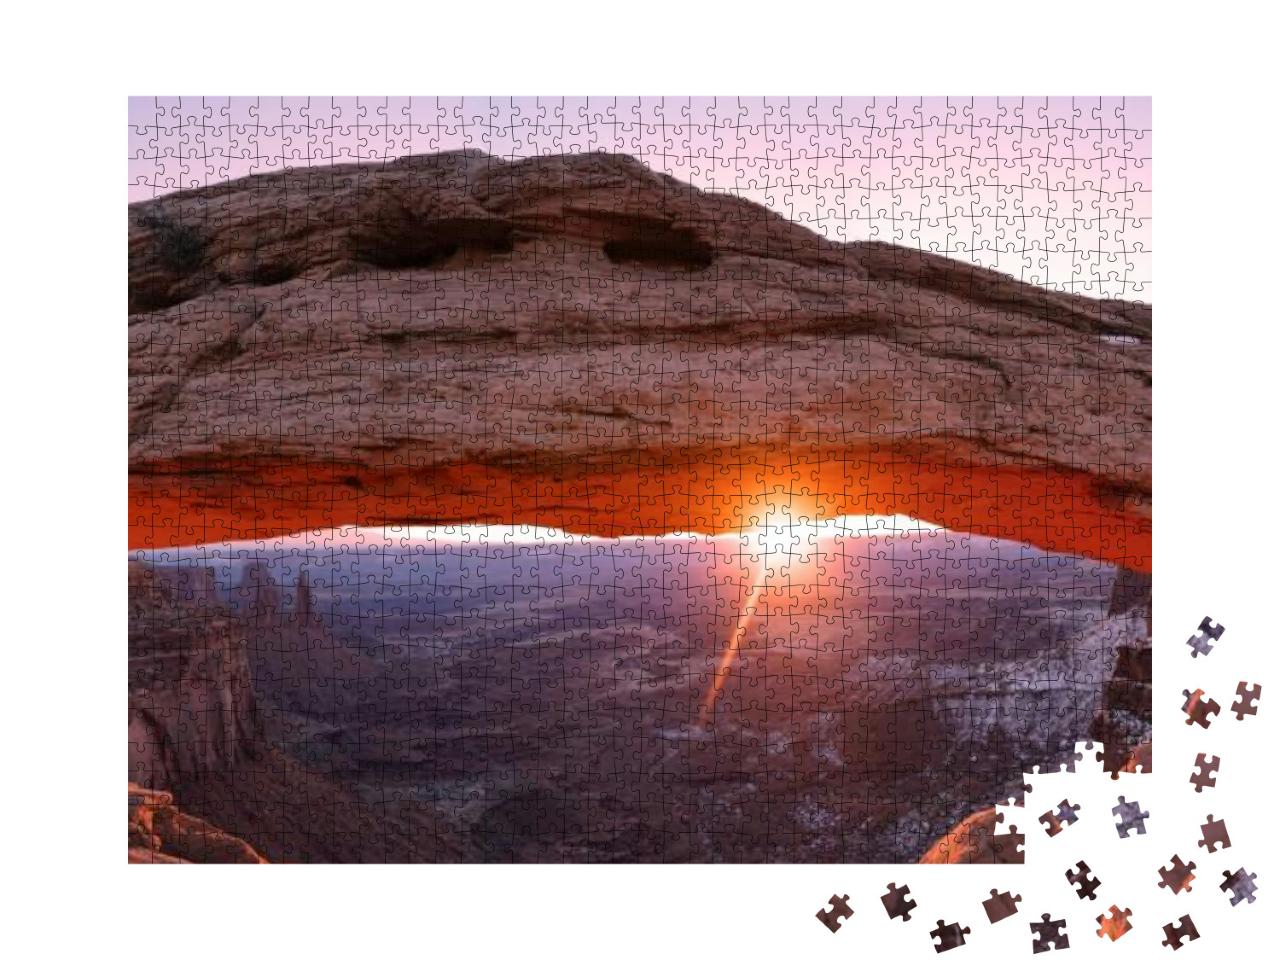 Sunrise At Mesa Arch of Canyonlands National Park, Utah U... Jigsaw Puzzle with 1000 pieces